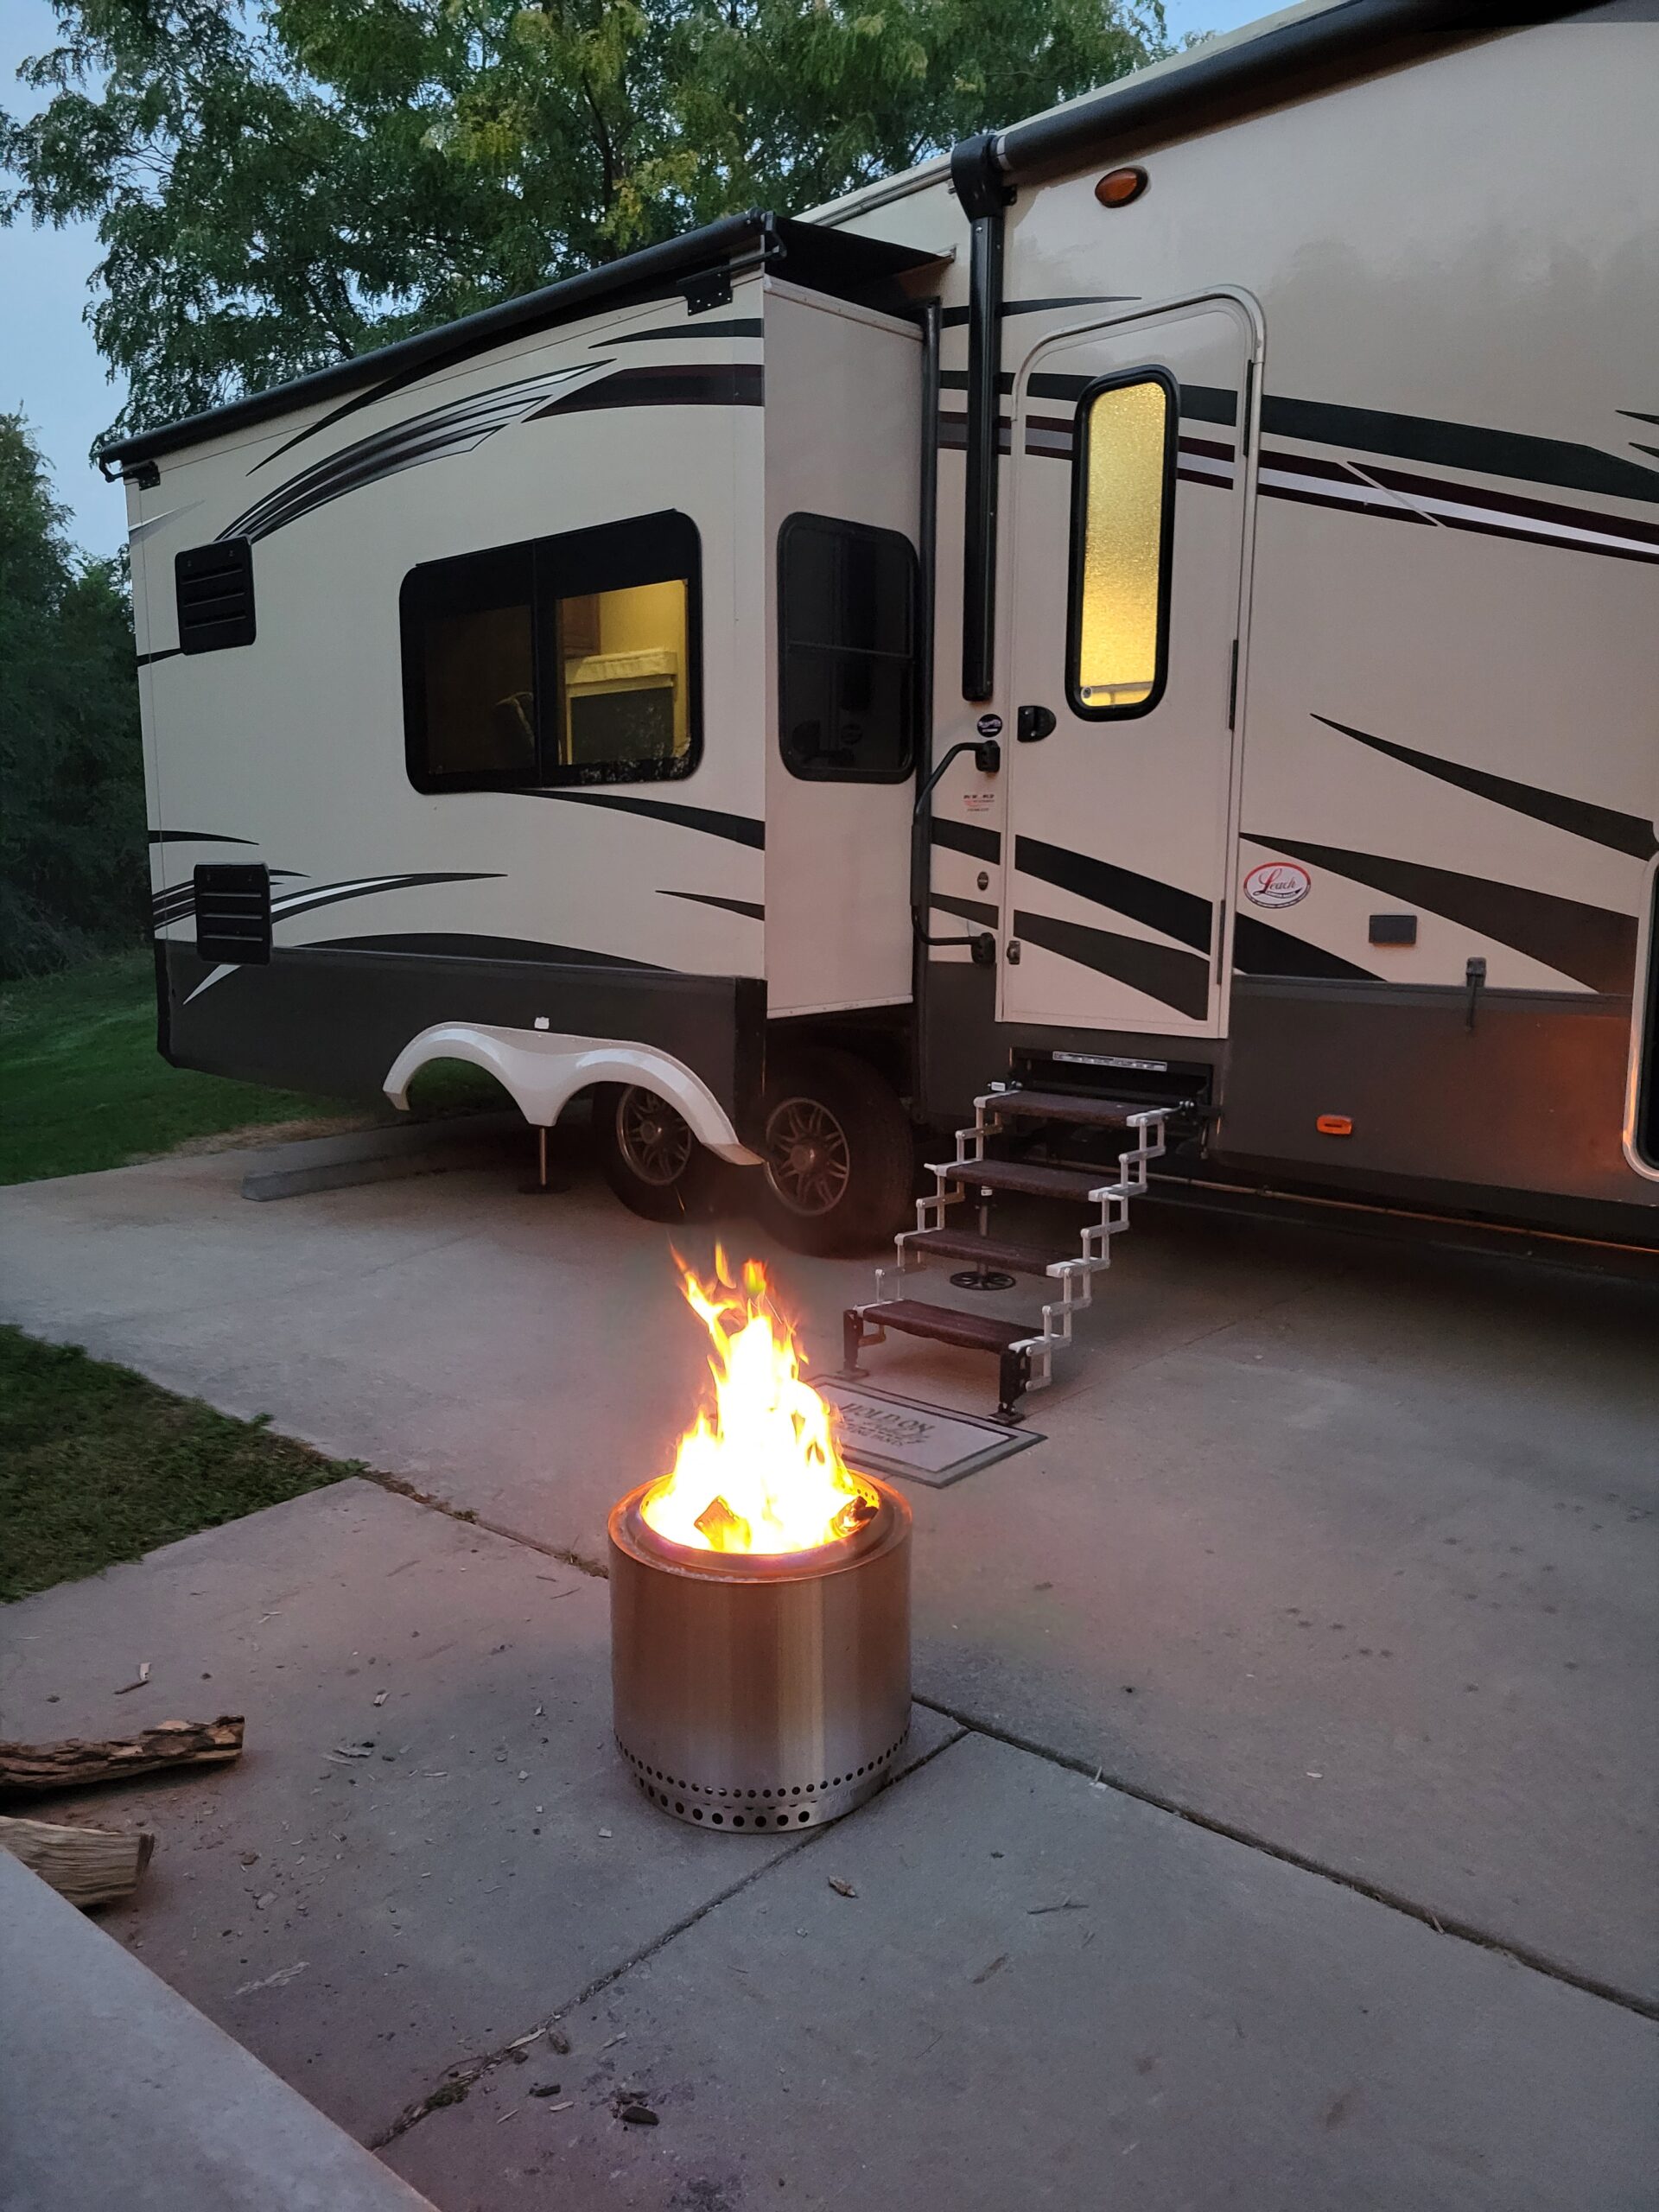 Campfire in front of RV